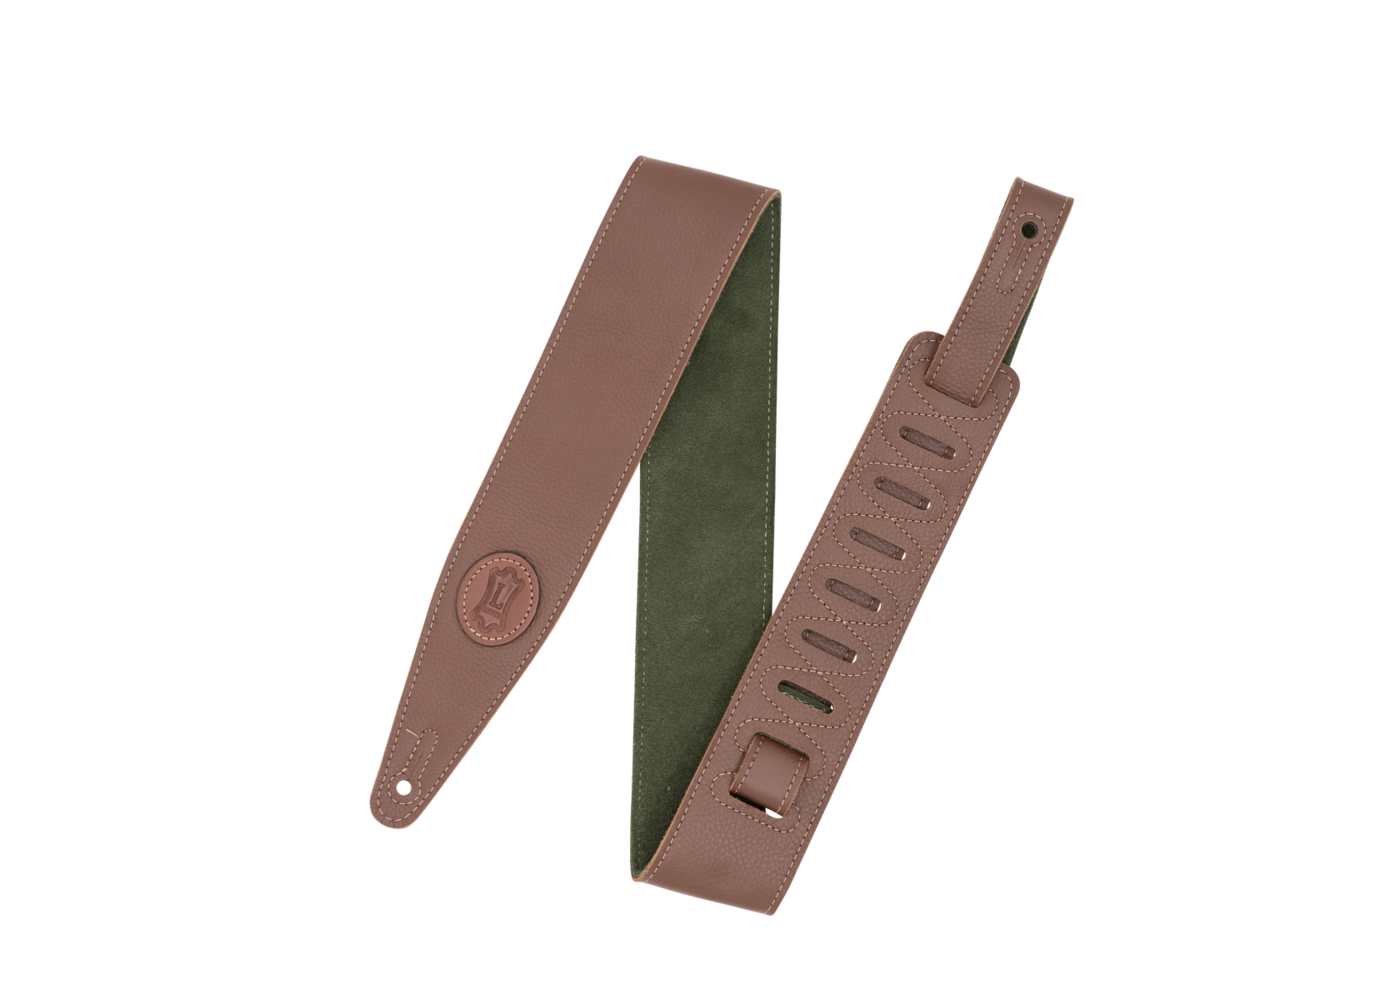 Levy's Levy's 2.5" Garment Leather Strap with Suede Backing - Brown/Green